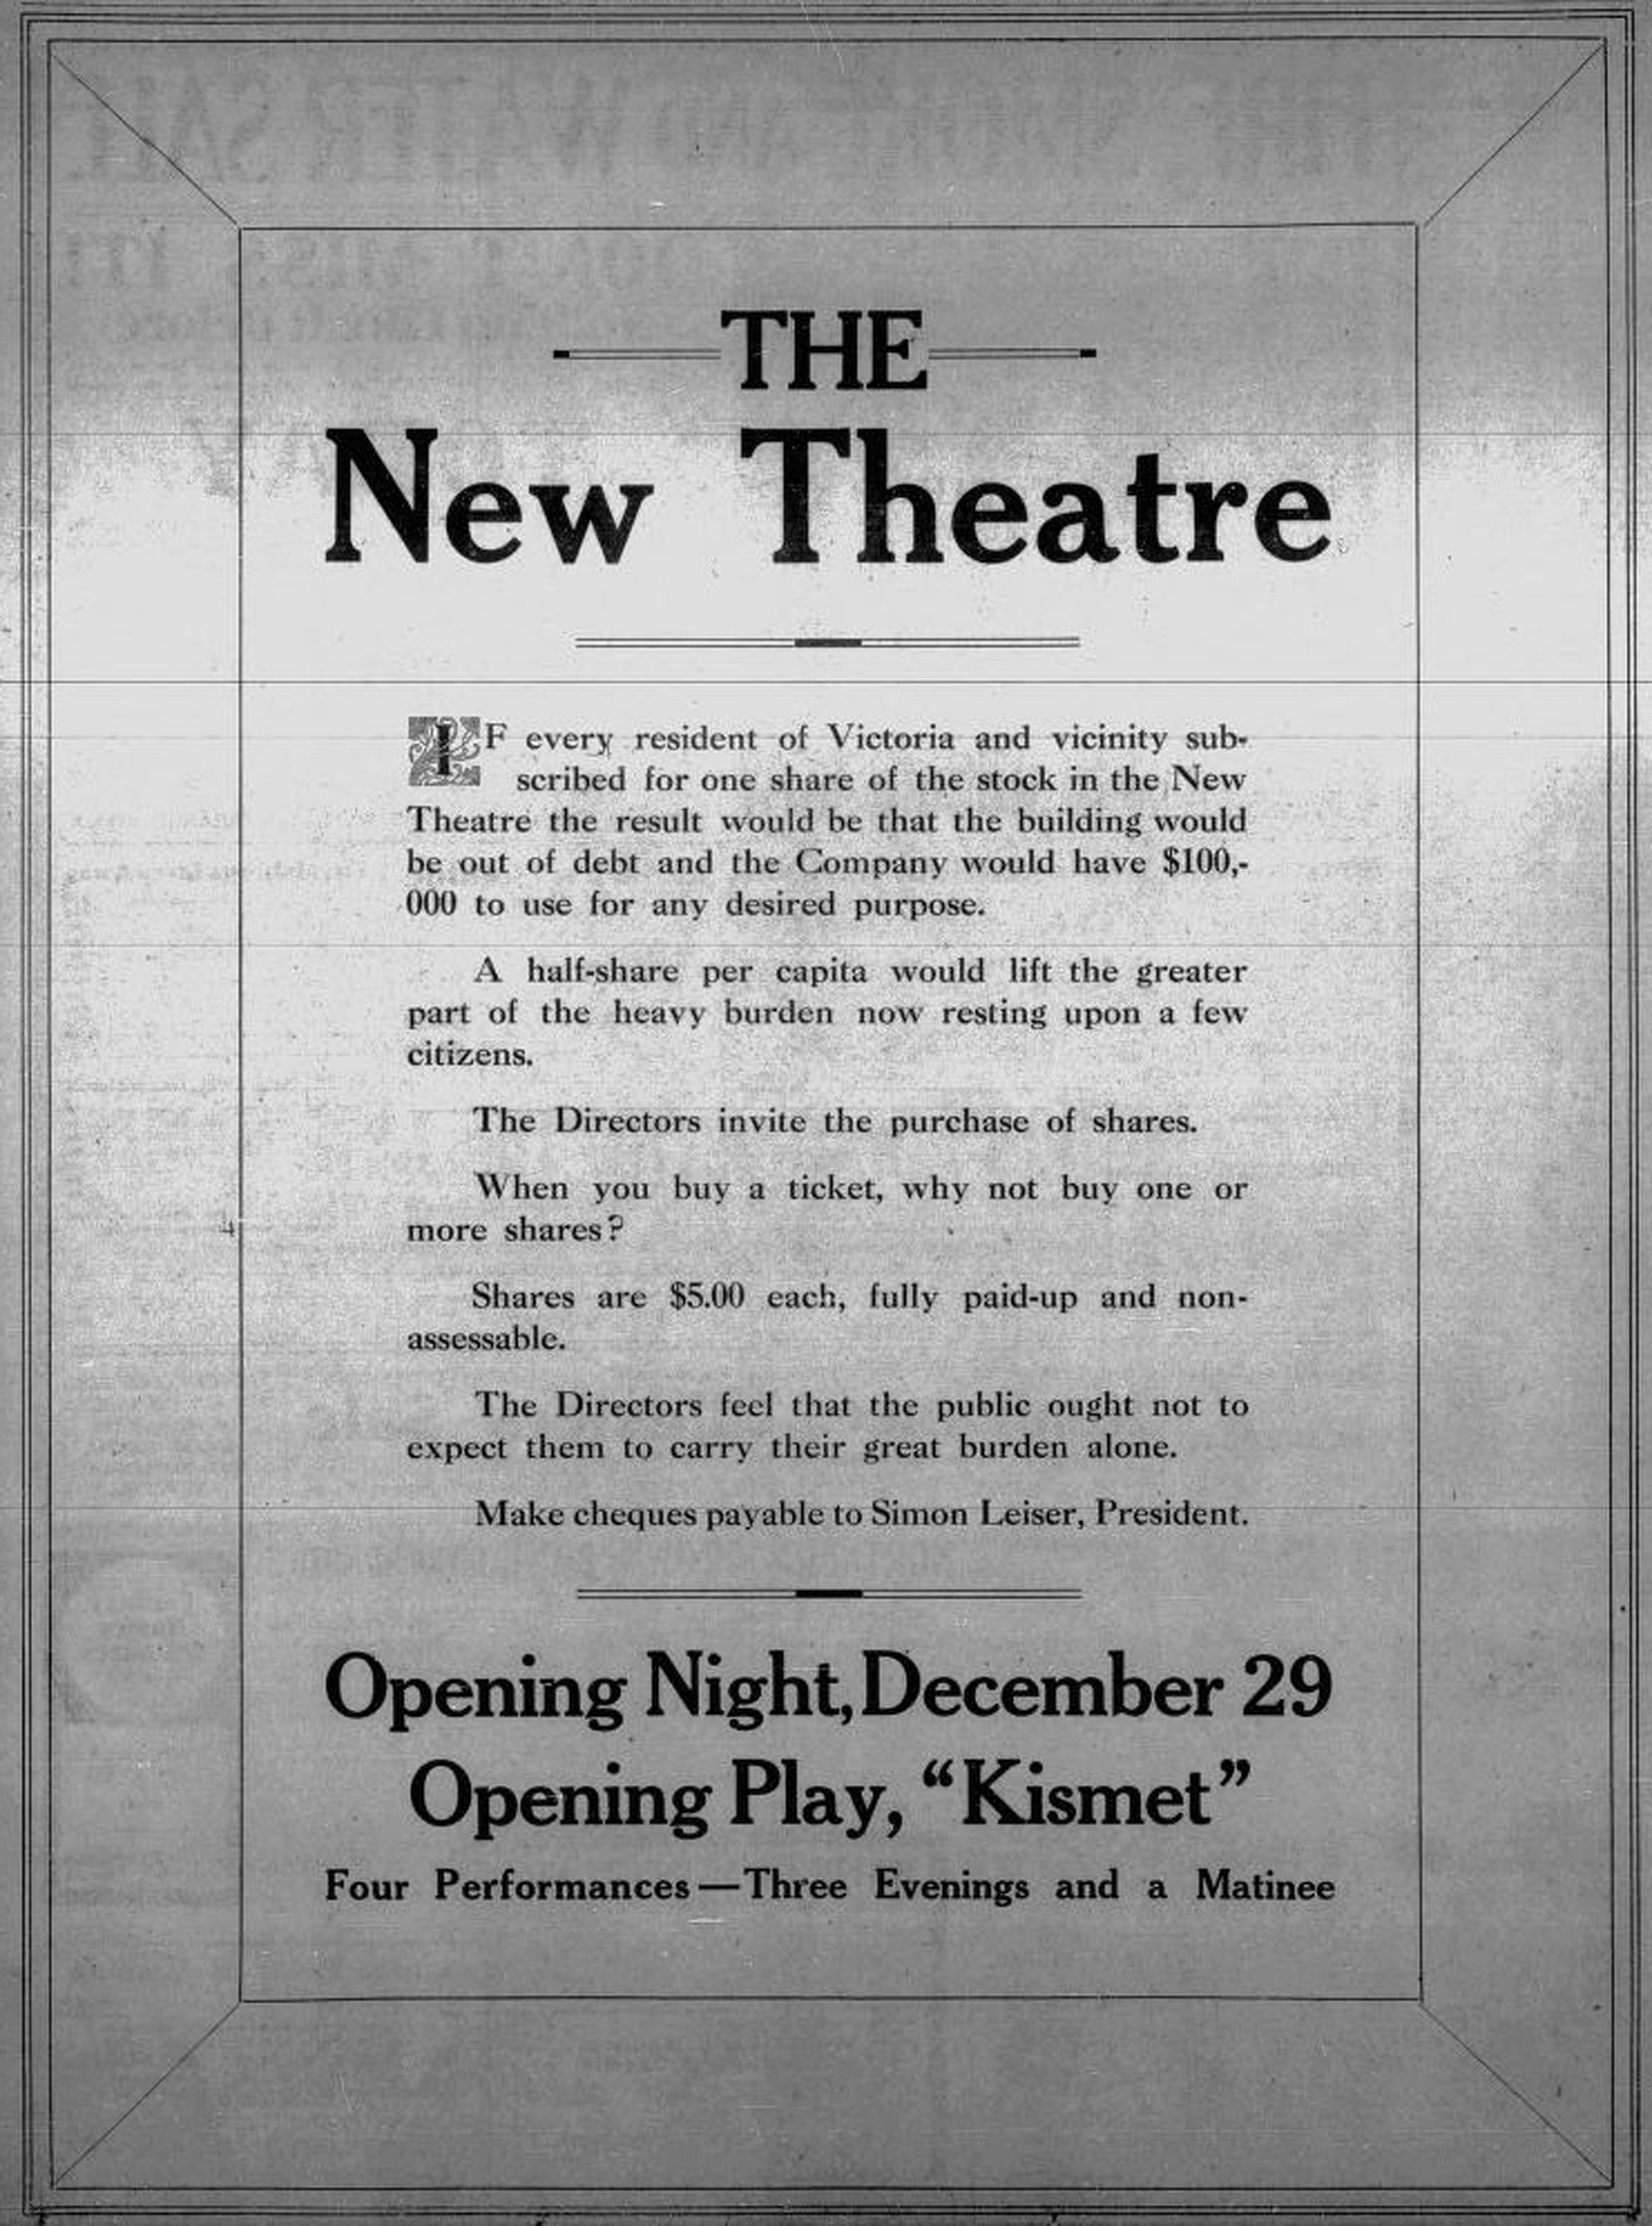 December 1913 advertisement for the opening night of the Royal Theatre, 805 Broughton Street. Note how the Directors of the company which built the theatre are asking theatre patrons to purchase shares in the theatre at 5.00 per share (Victoria Online Sightseeing Tours collection)